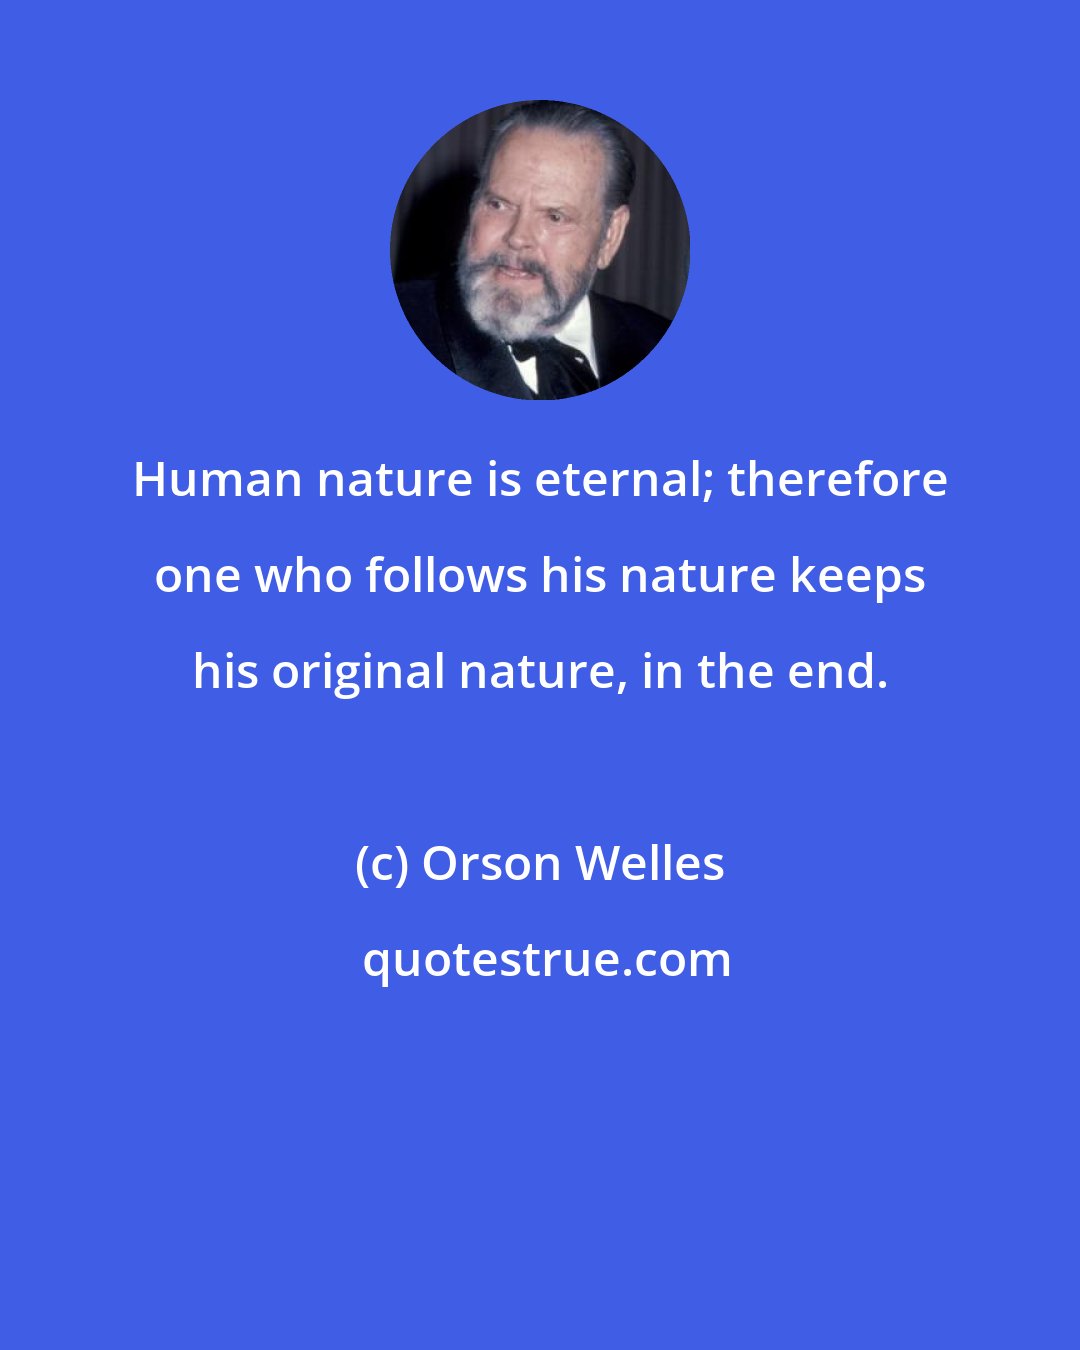 Orson Welles: Human nature is eternal; therefore one who follows his nature keeps his original nature, in the end.